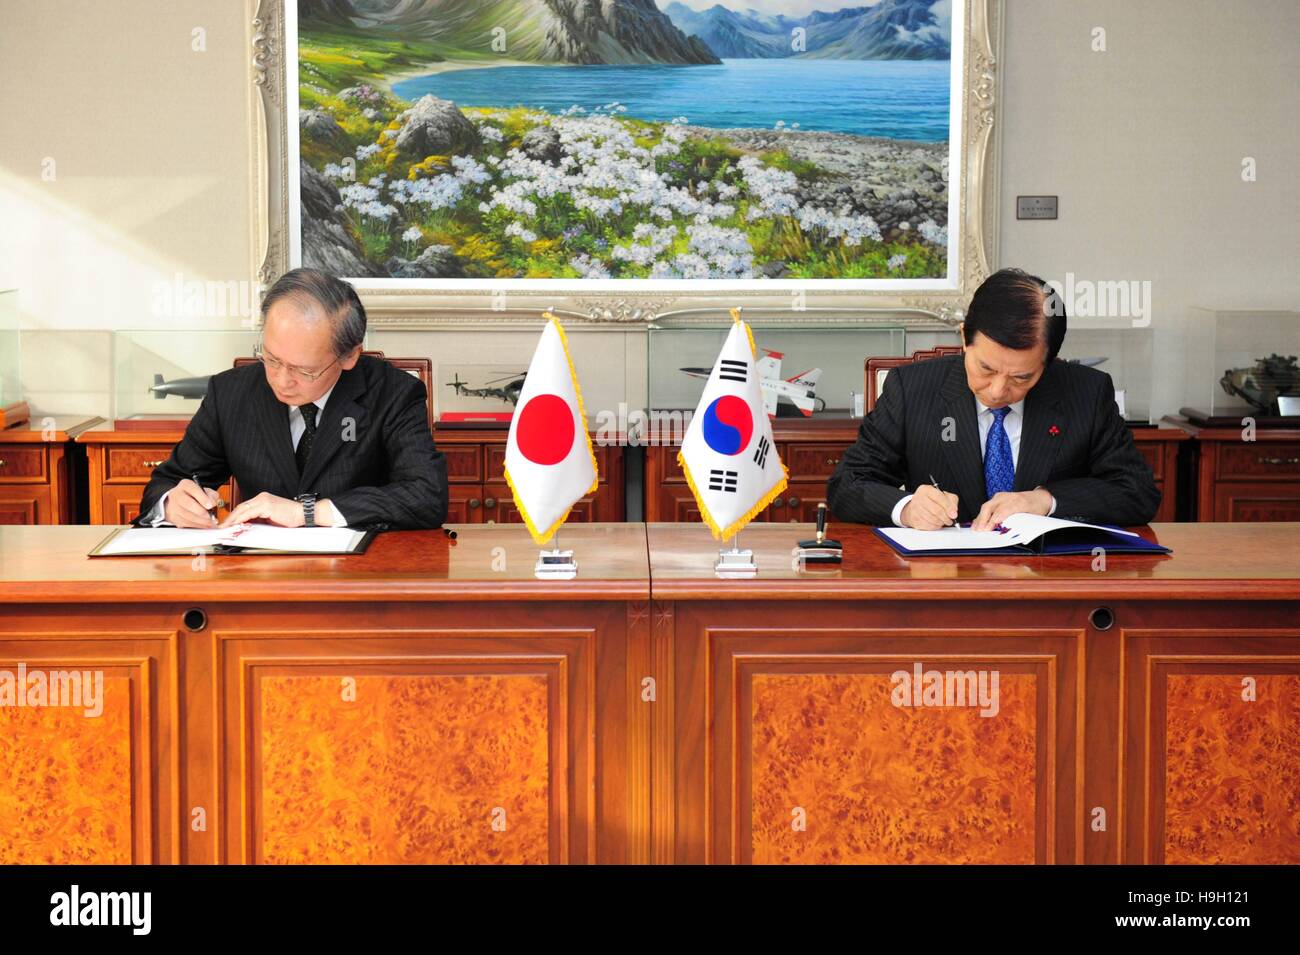 Seoul, South Korea. 23rd Nov, 2016. South Korean Defense Minister Han Min-koo (R) and Japanese Ambassador to South Korea Yasumasa Nagamine sign the General Security of the Military Information Agreement (GSOMIA) in Seoul, South Korea, Nov. 23, 2016. South Korea and Japan on Wednesday signed a military intelligence pact despite public and parliamentary opposition. © Xinhua/Alamy Live News Stock Photo